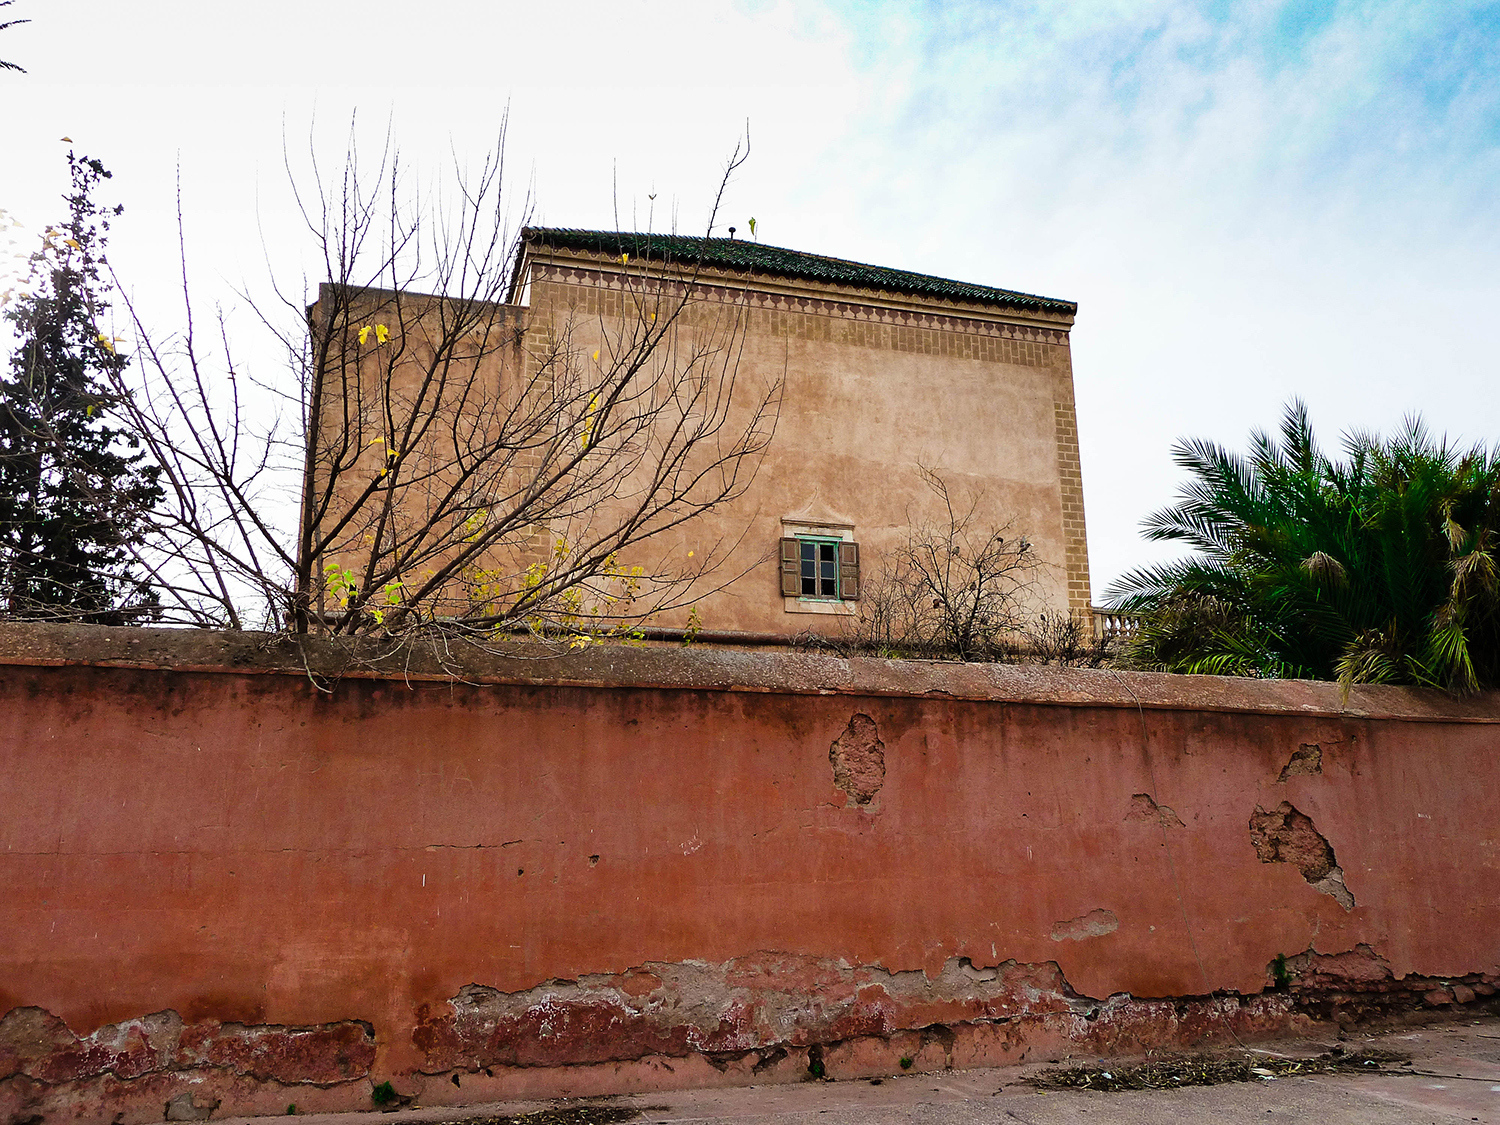 <p>A view of the Menara, a pavilion that dates from the 16th Century and sometimes served as a sultan's summer quarters. </p>